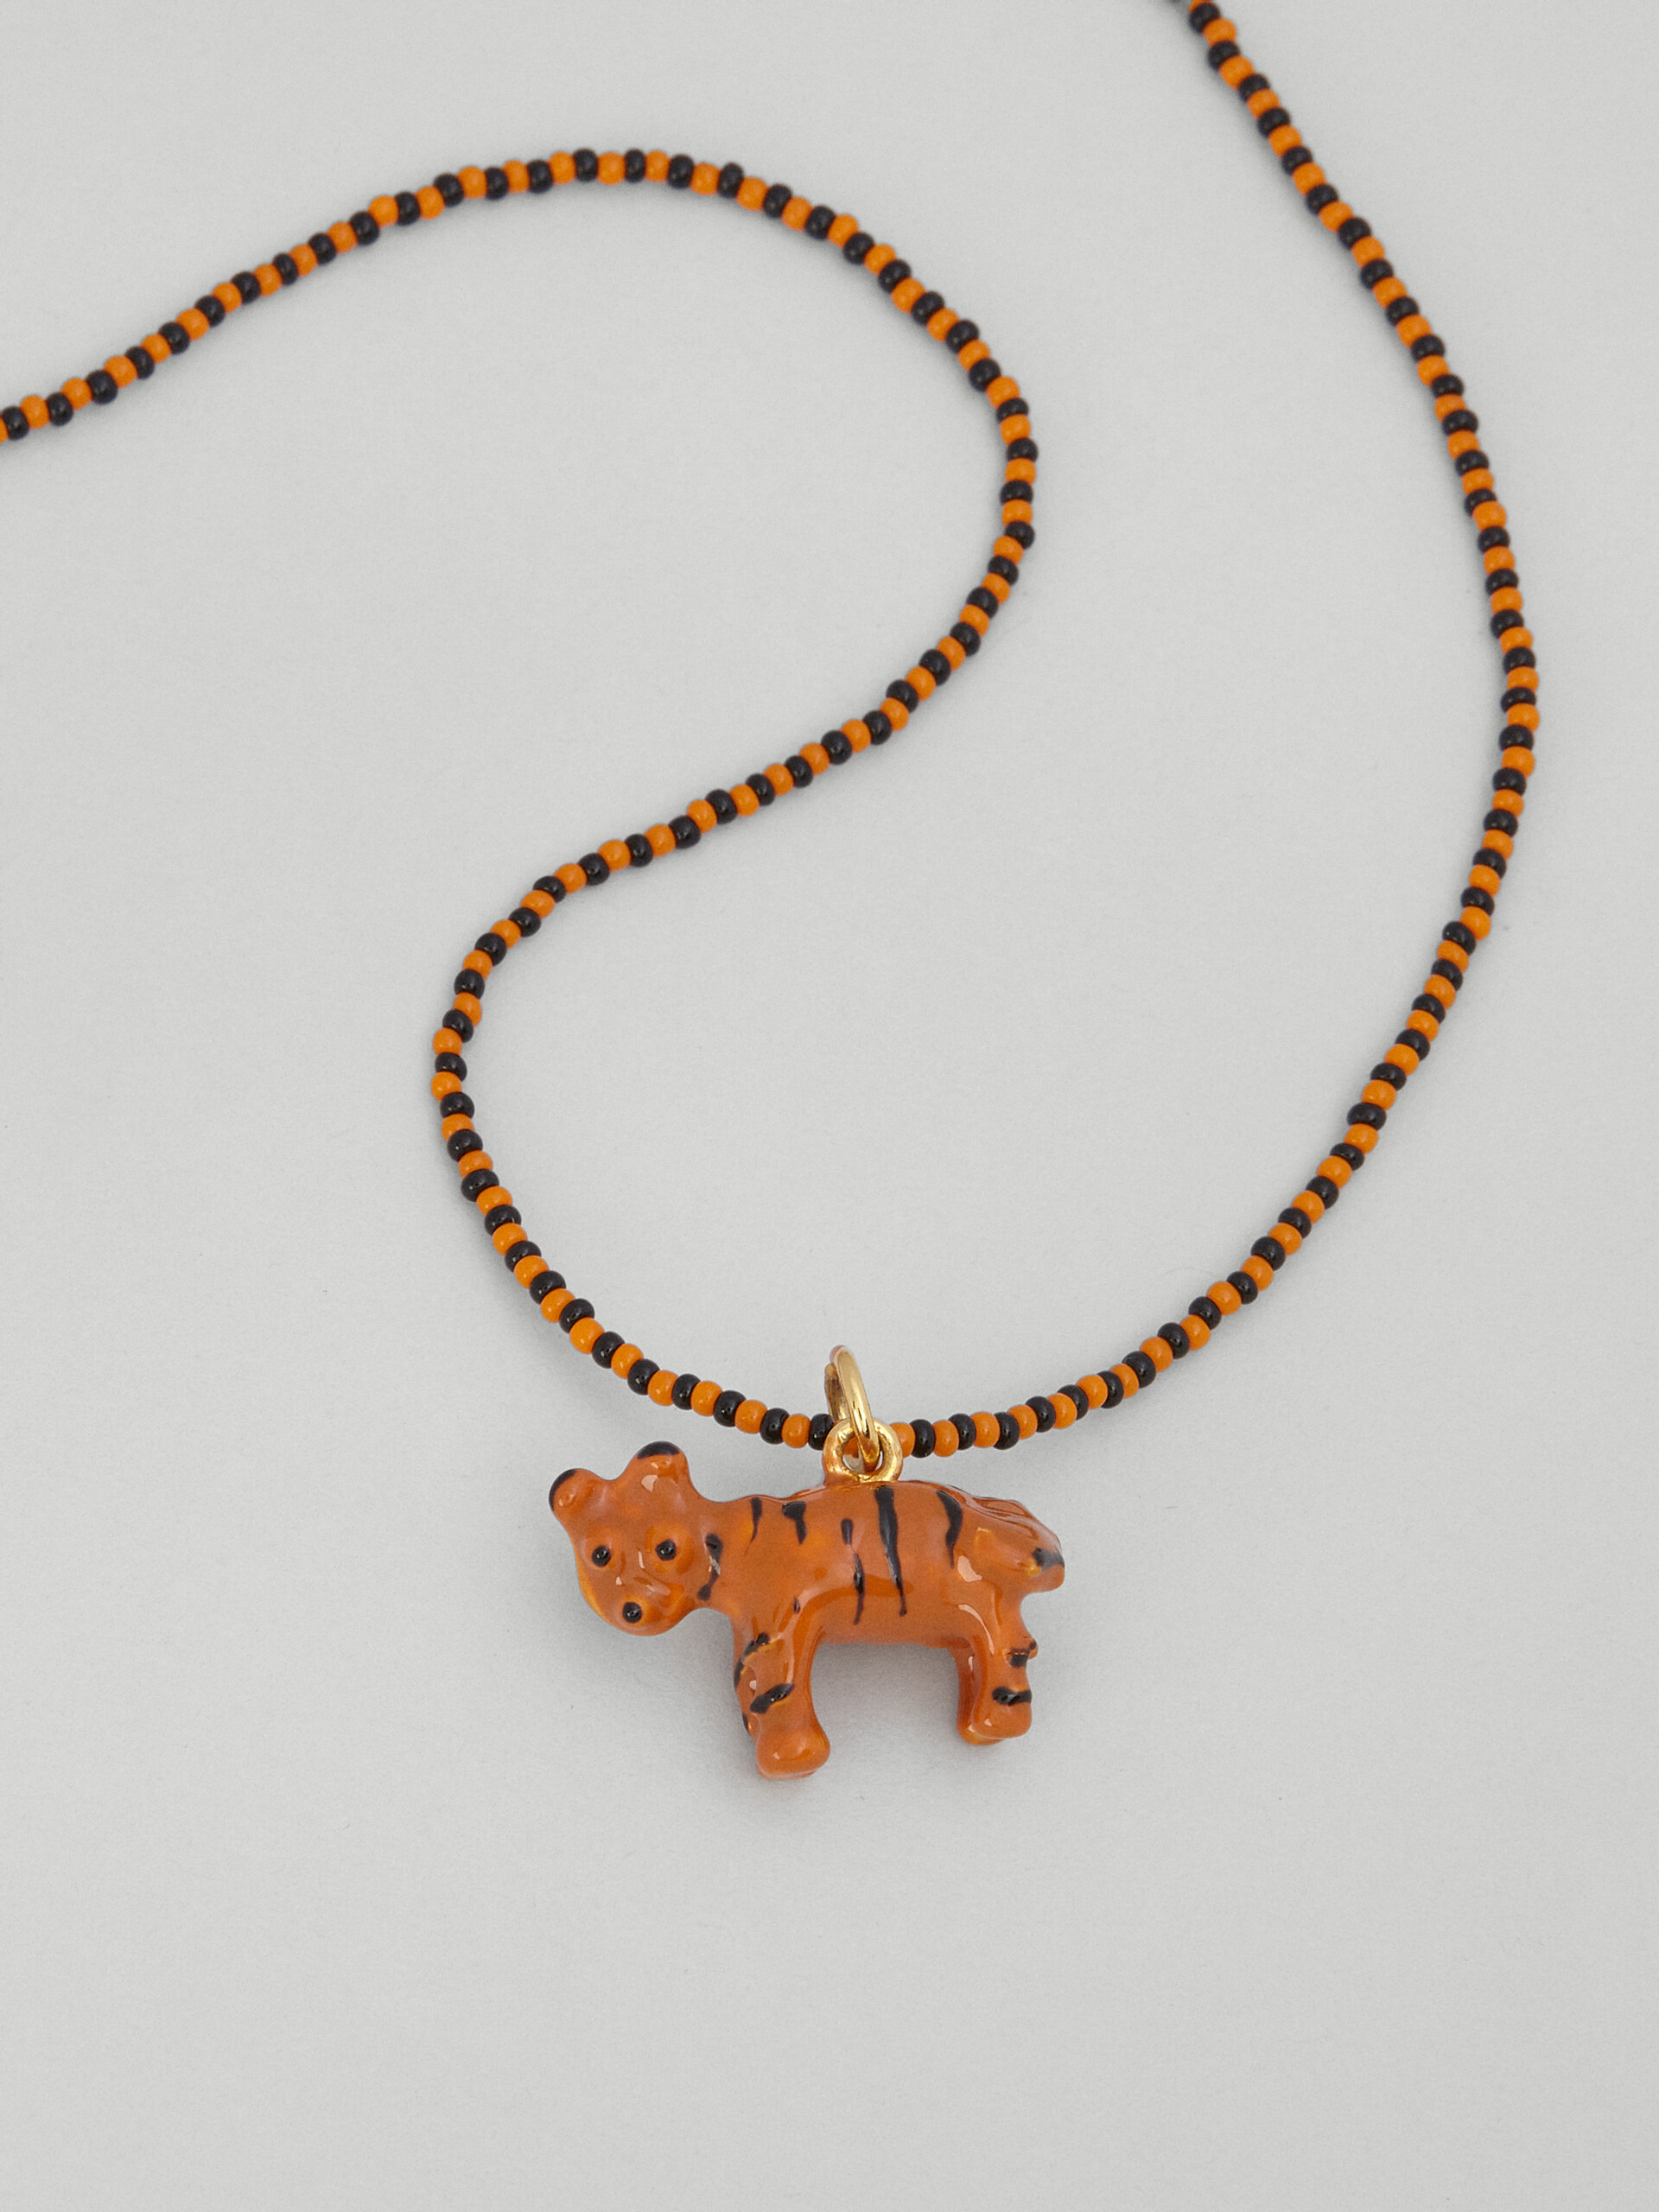 NAIF TIGER necklace in glass and resin - Necklaces - Image 3